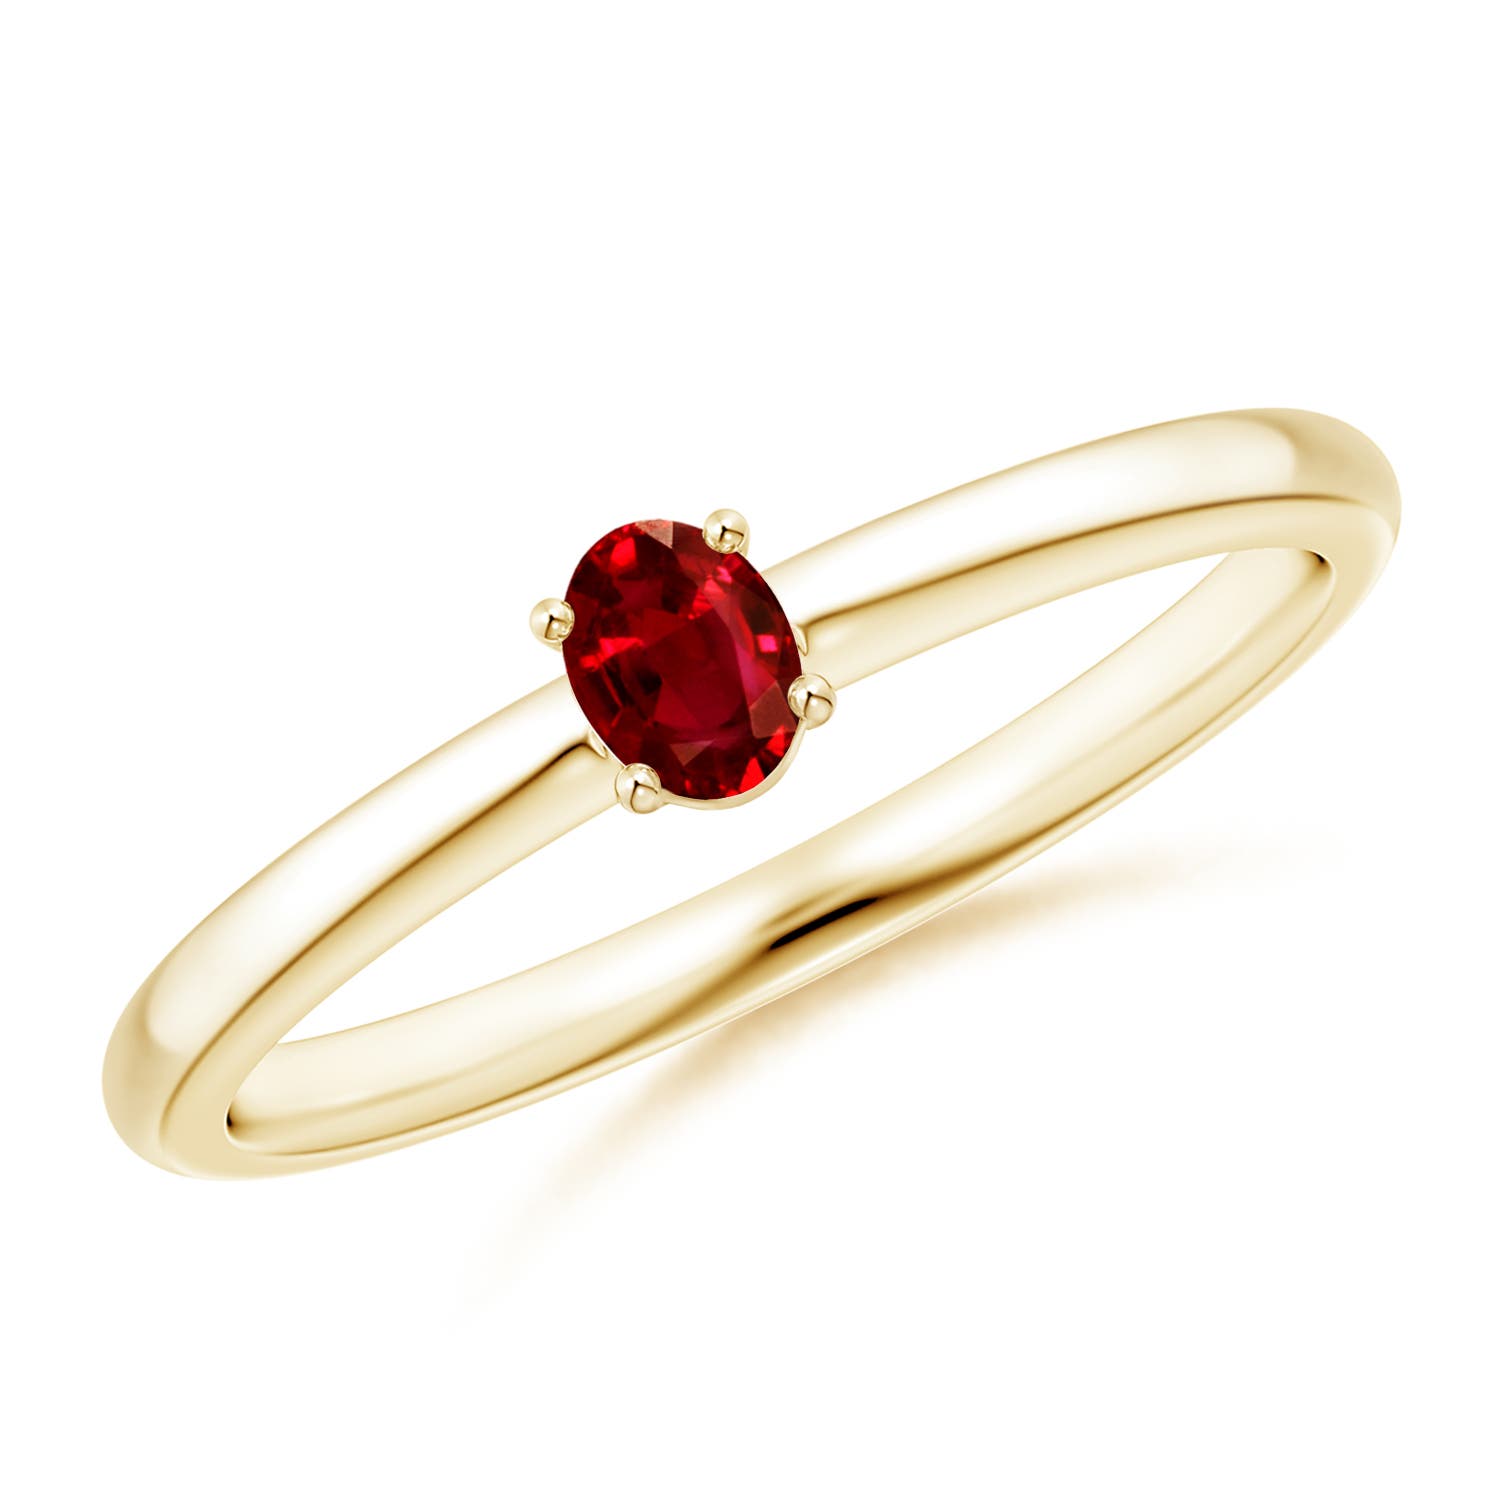 AAAA - Ruby / 0.2 CT / 14 KT Yellow Gold